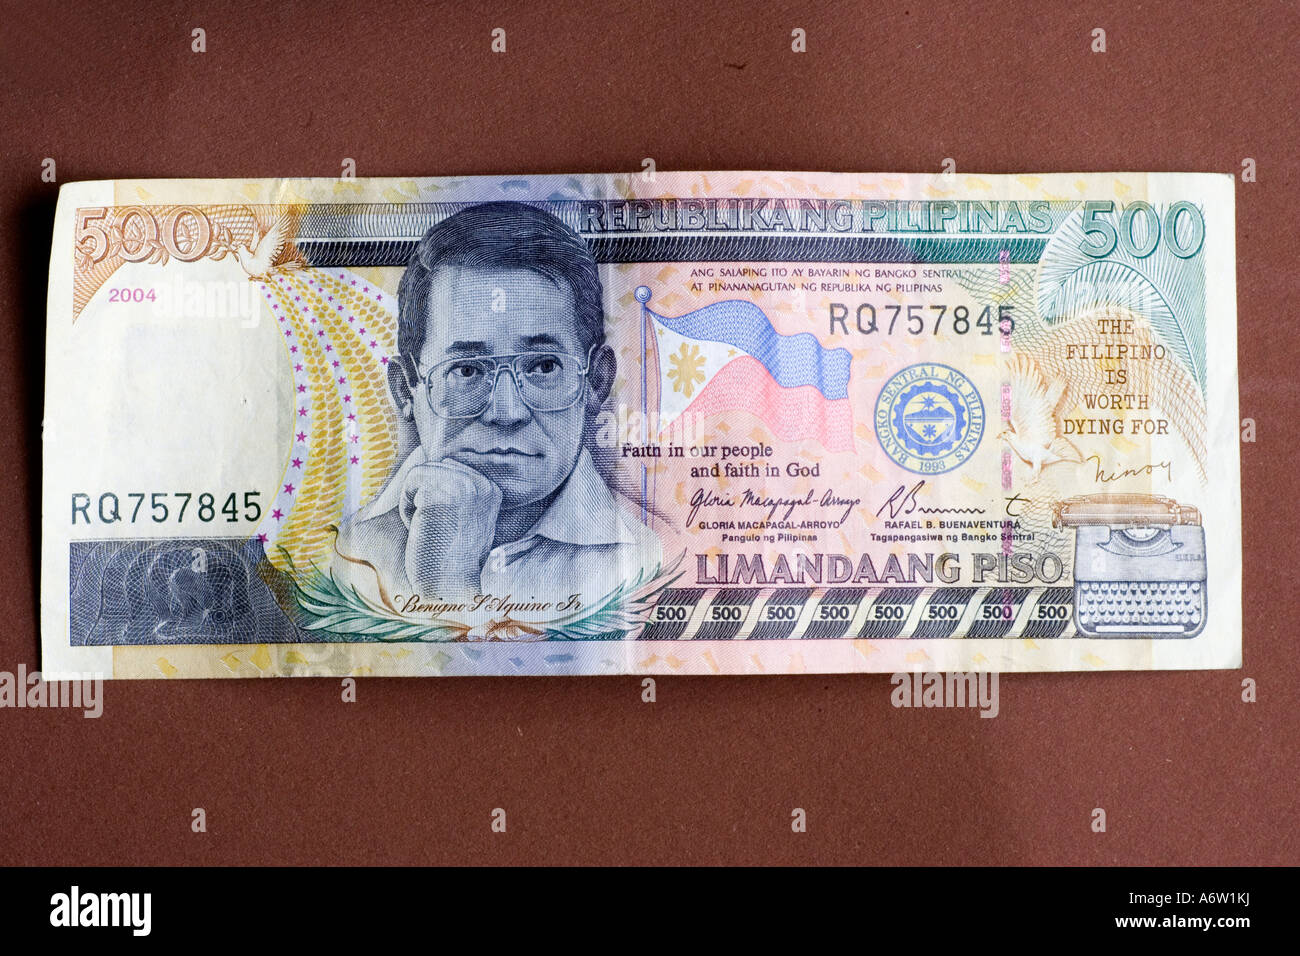 Banknote of the Philippines Stock Photo